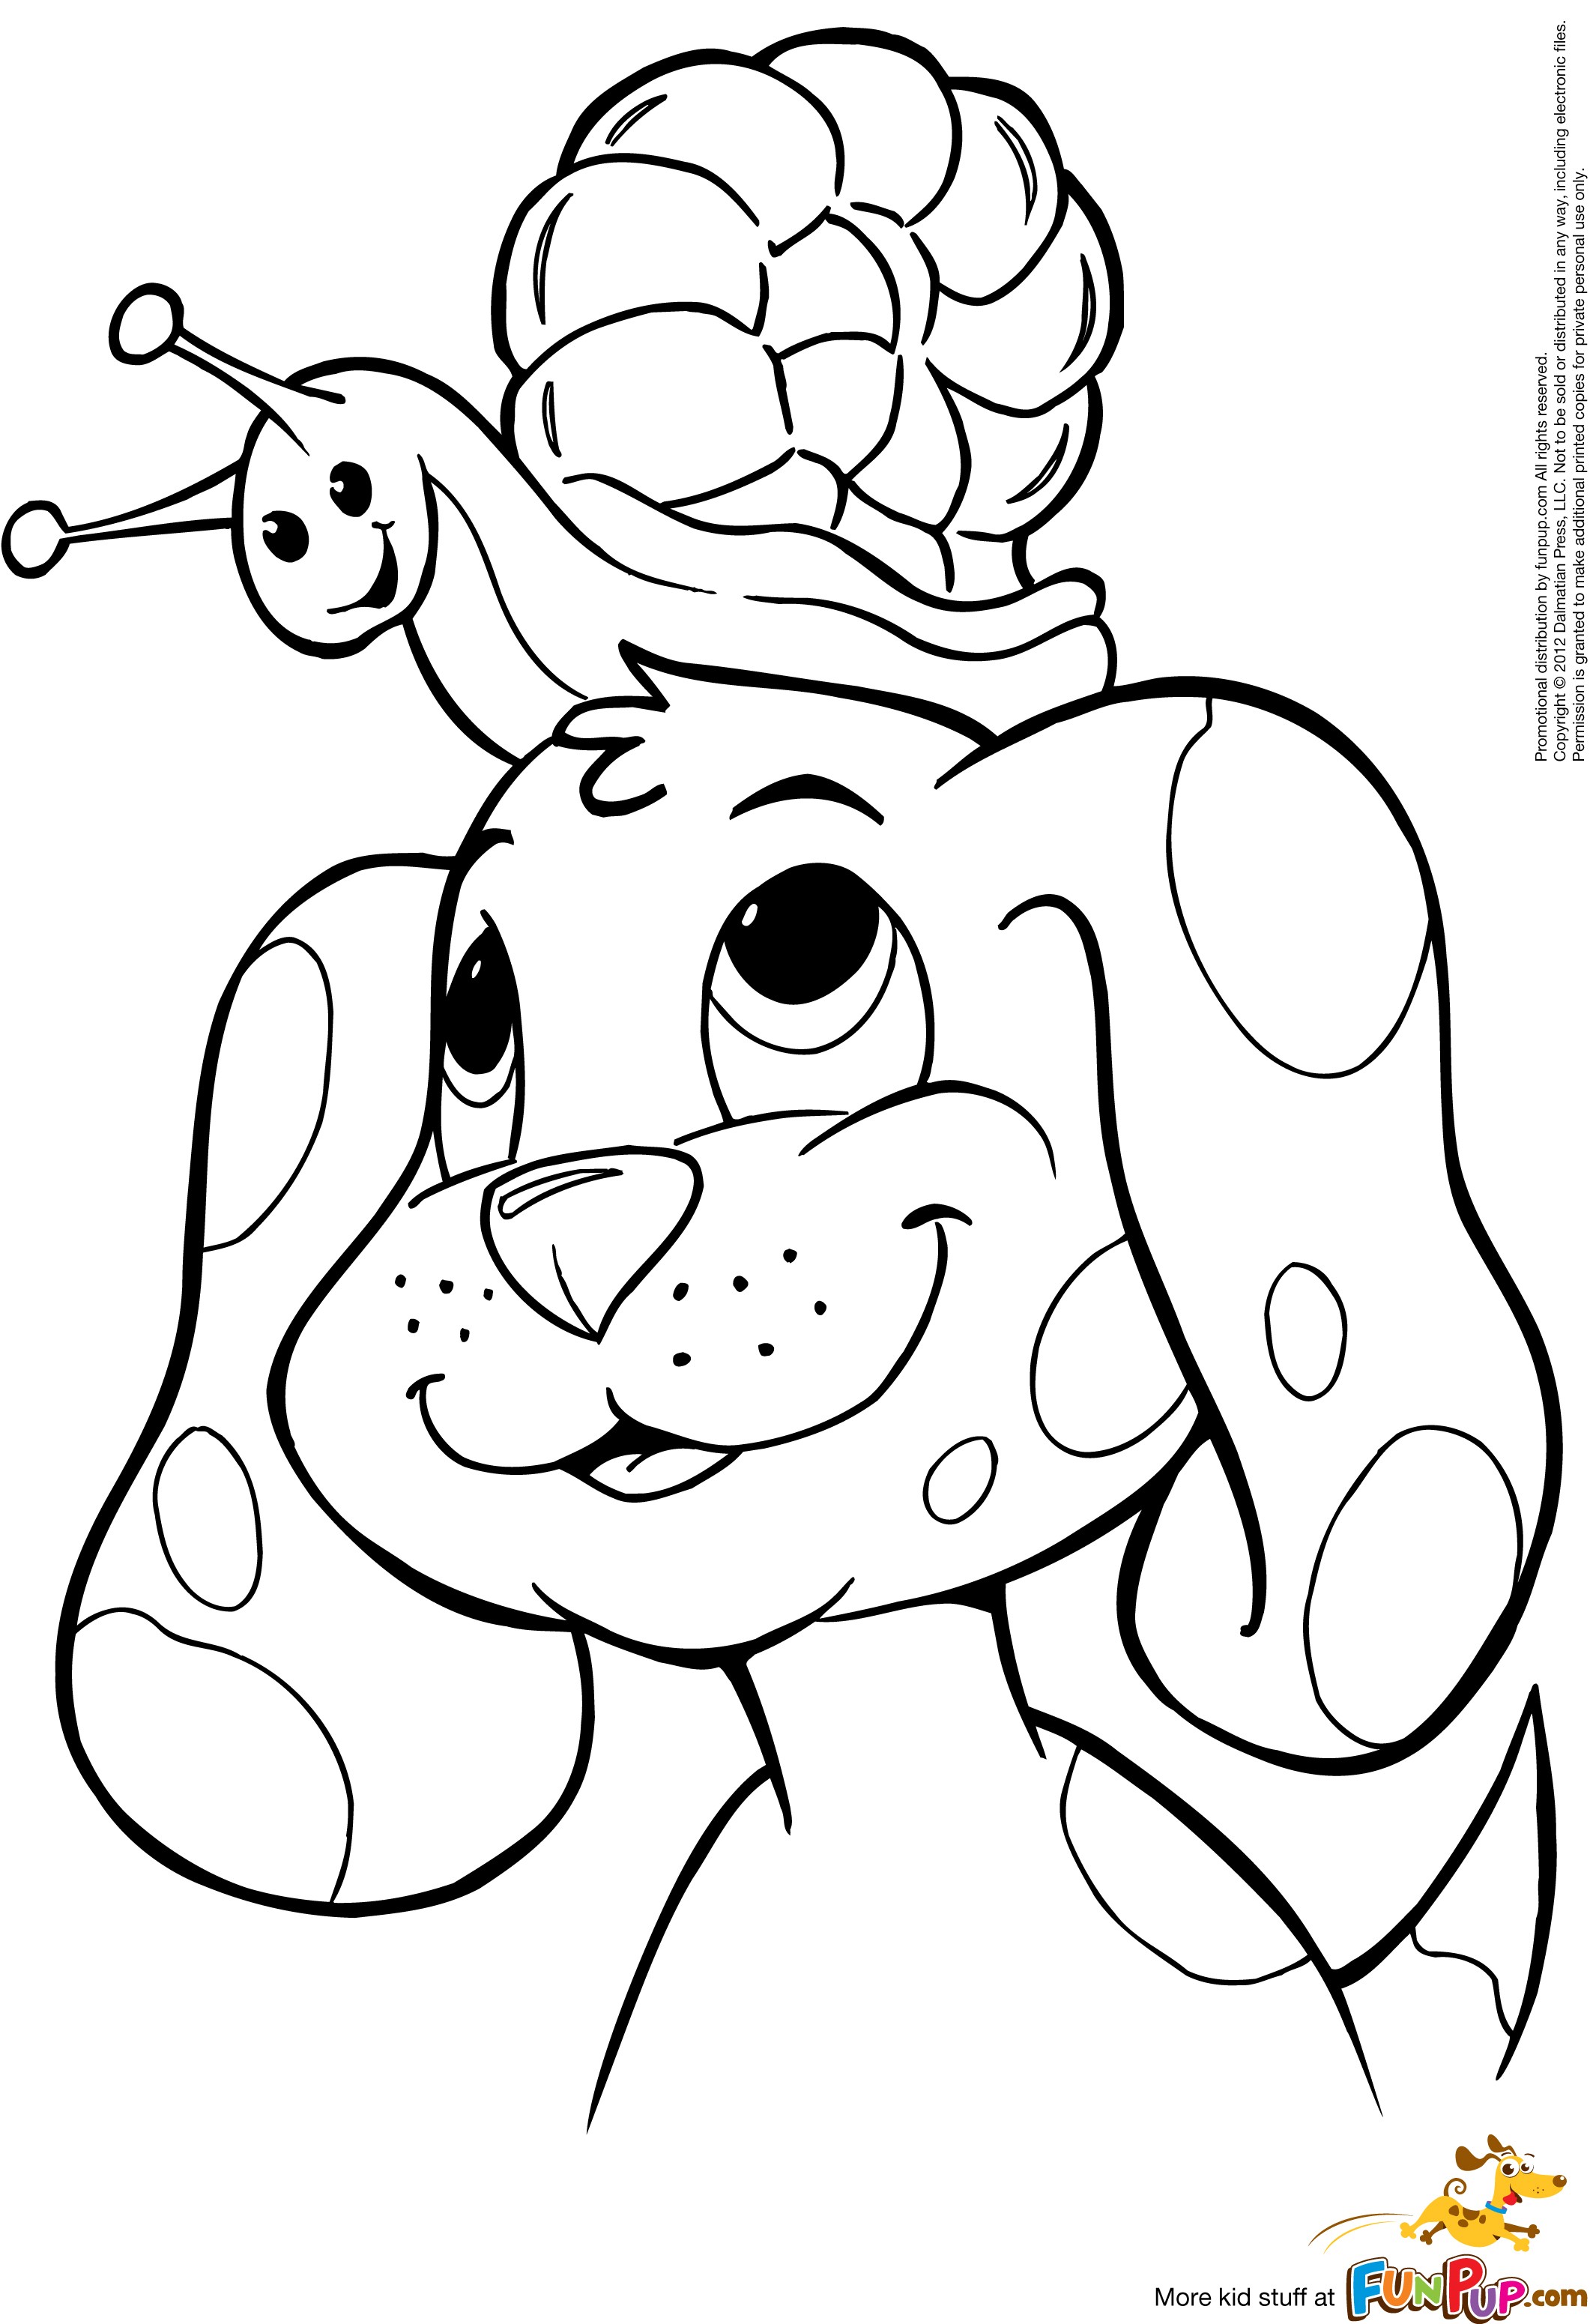 Baby Puppy Coloring Pages at GetColorings.com | Free ...